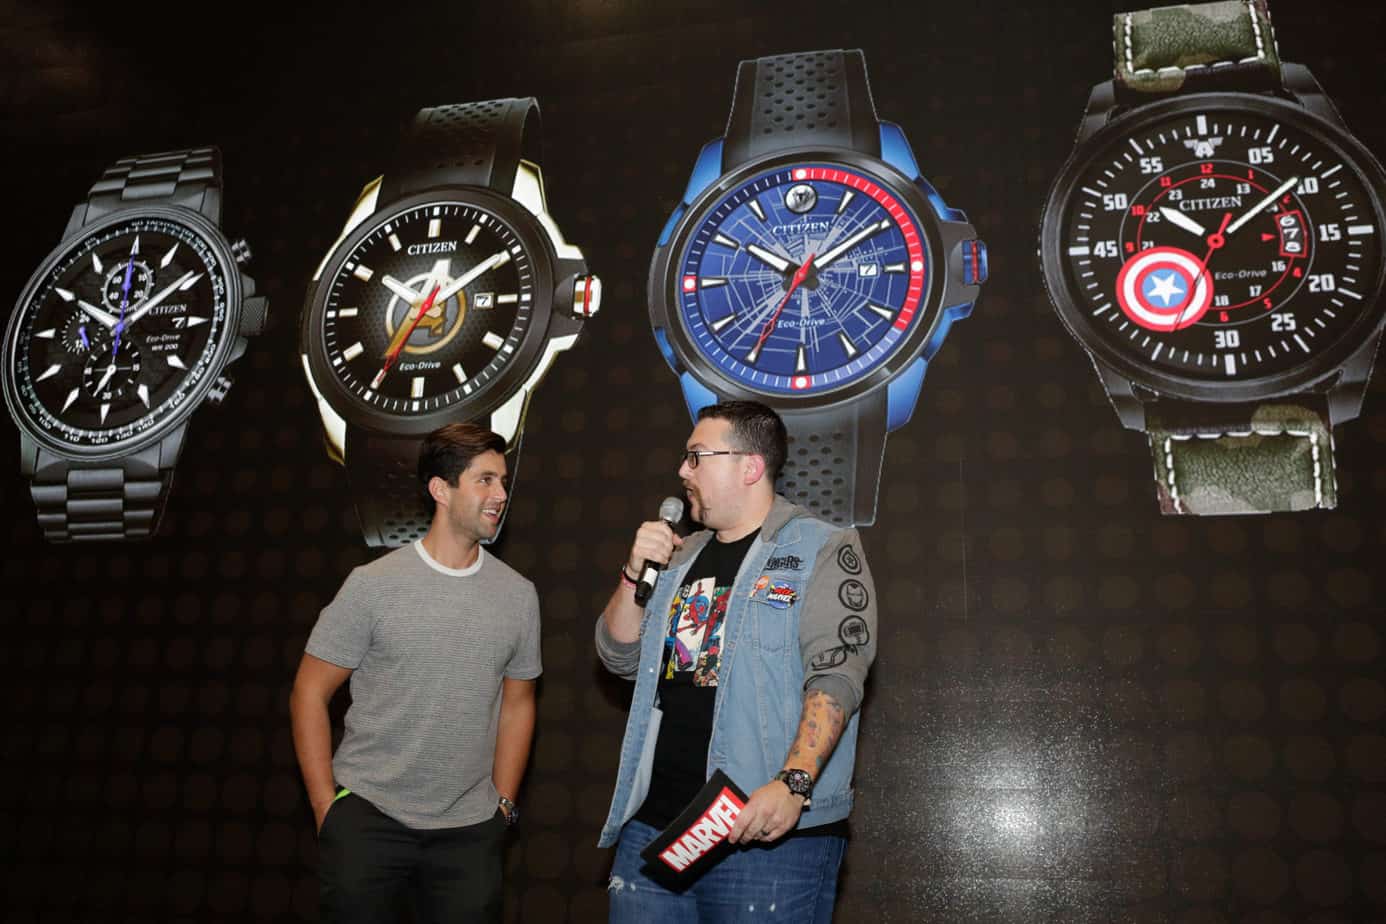 Josh Peck Unveiling Marvel Avengers Themed Timepieces.